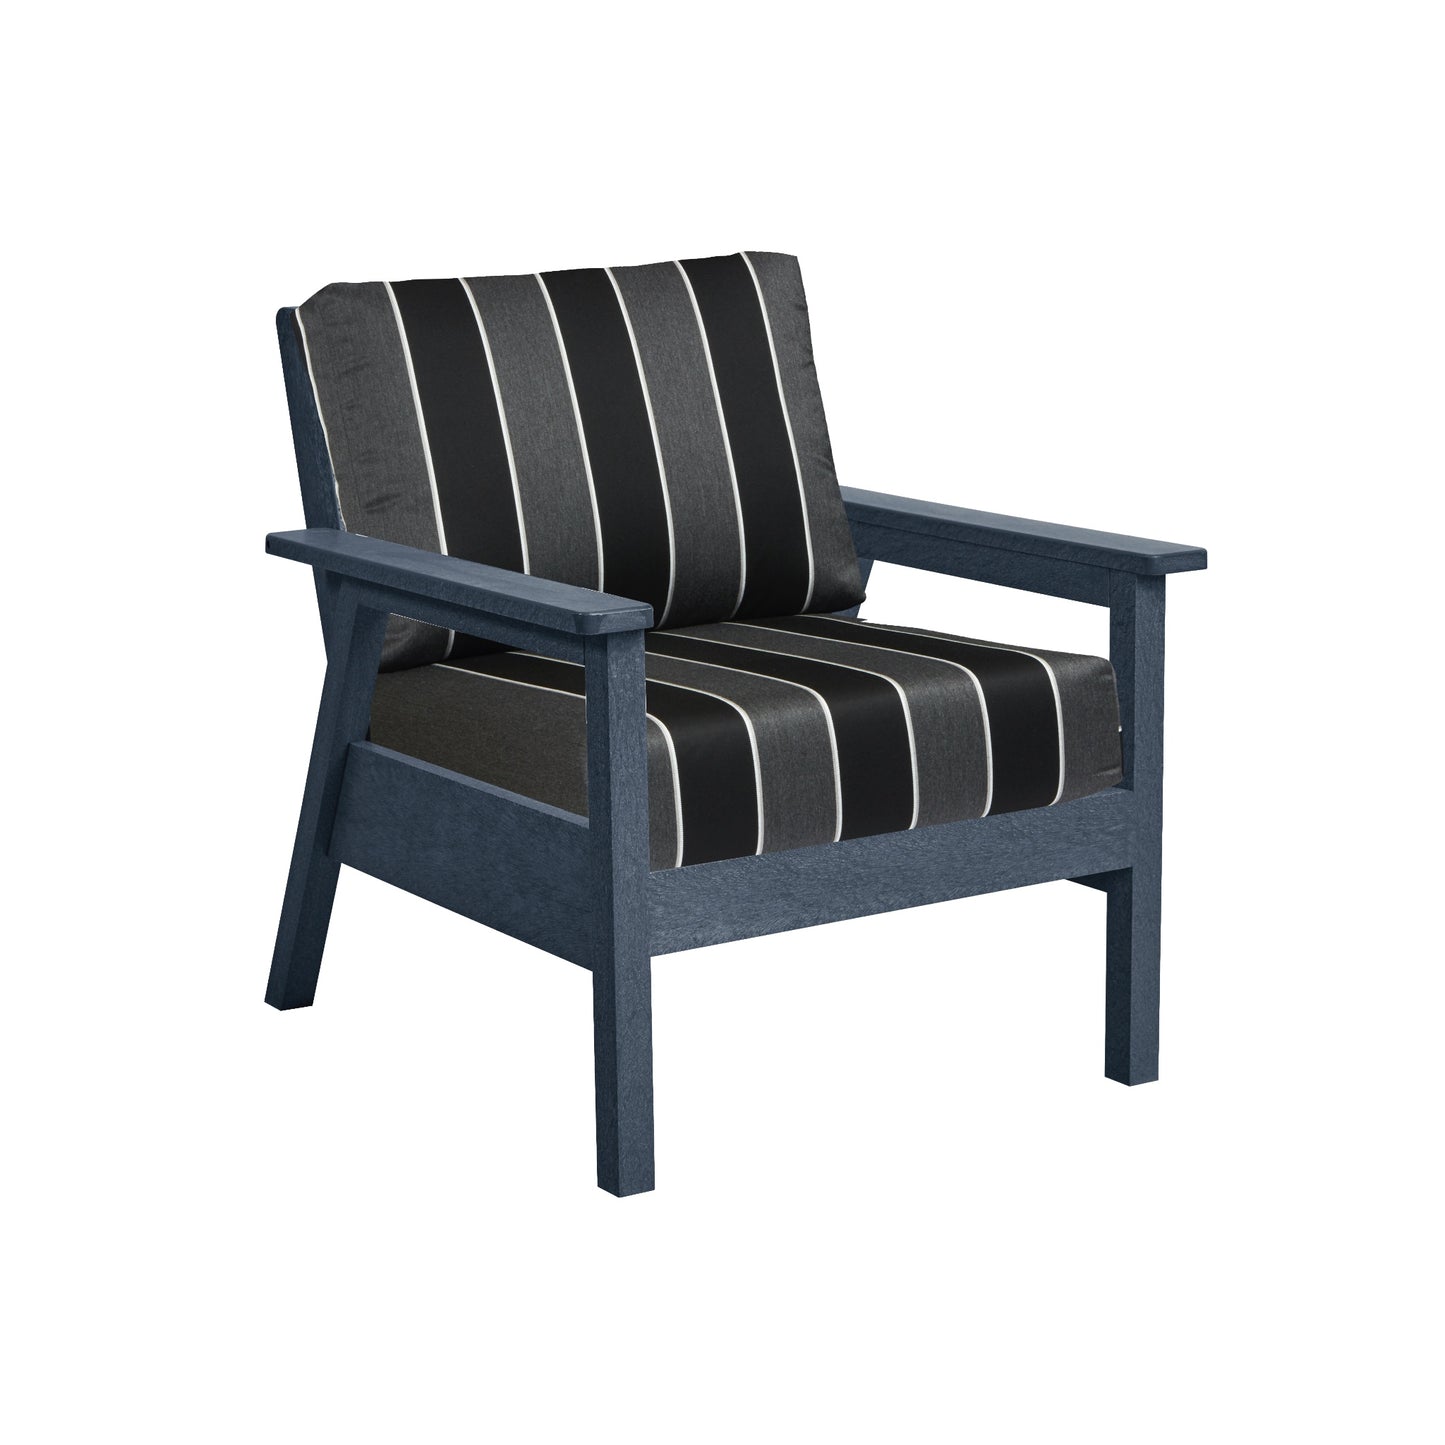 Tofino Chair SLATE FRAME WITH CUSHIONS - DSF281 [DSF241]